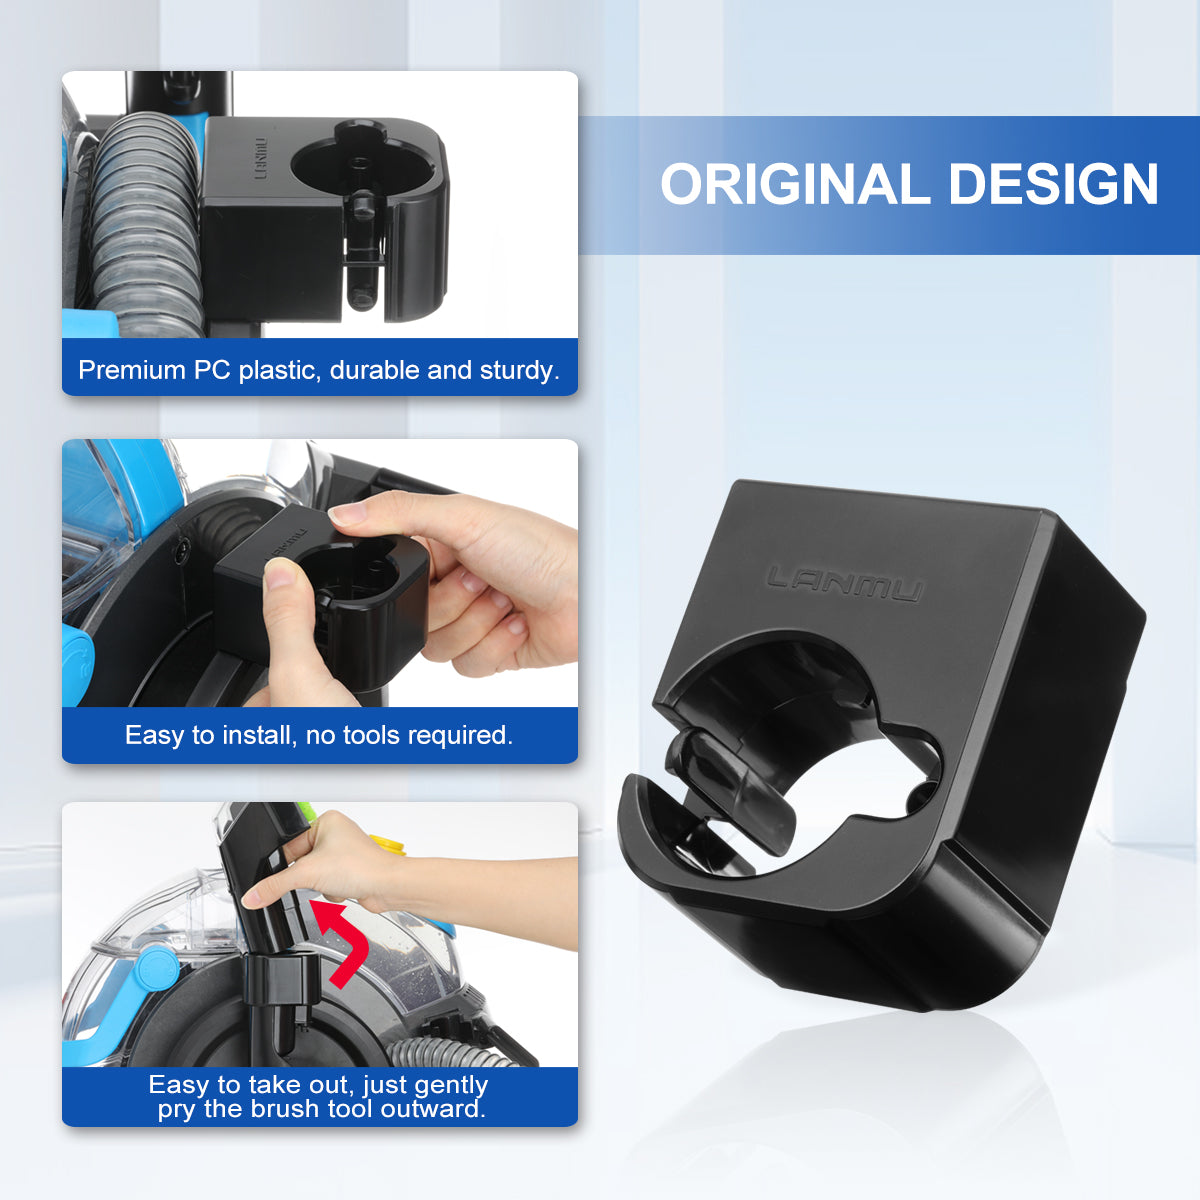 By using the LANMU attachment bracket, not only can you keep your cleaning brush tools organized and within reach, but it also facilitates drying of the brush tools, extending the lifespan of the flex hose.